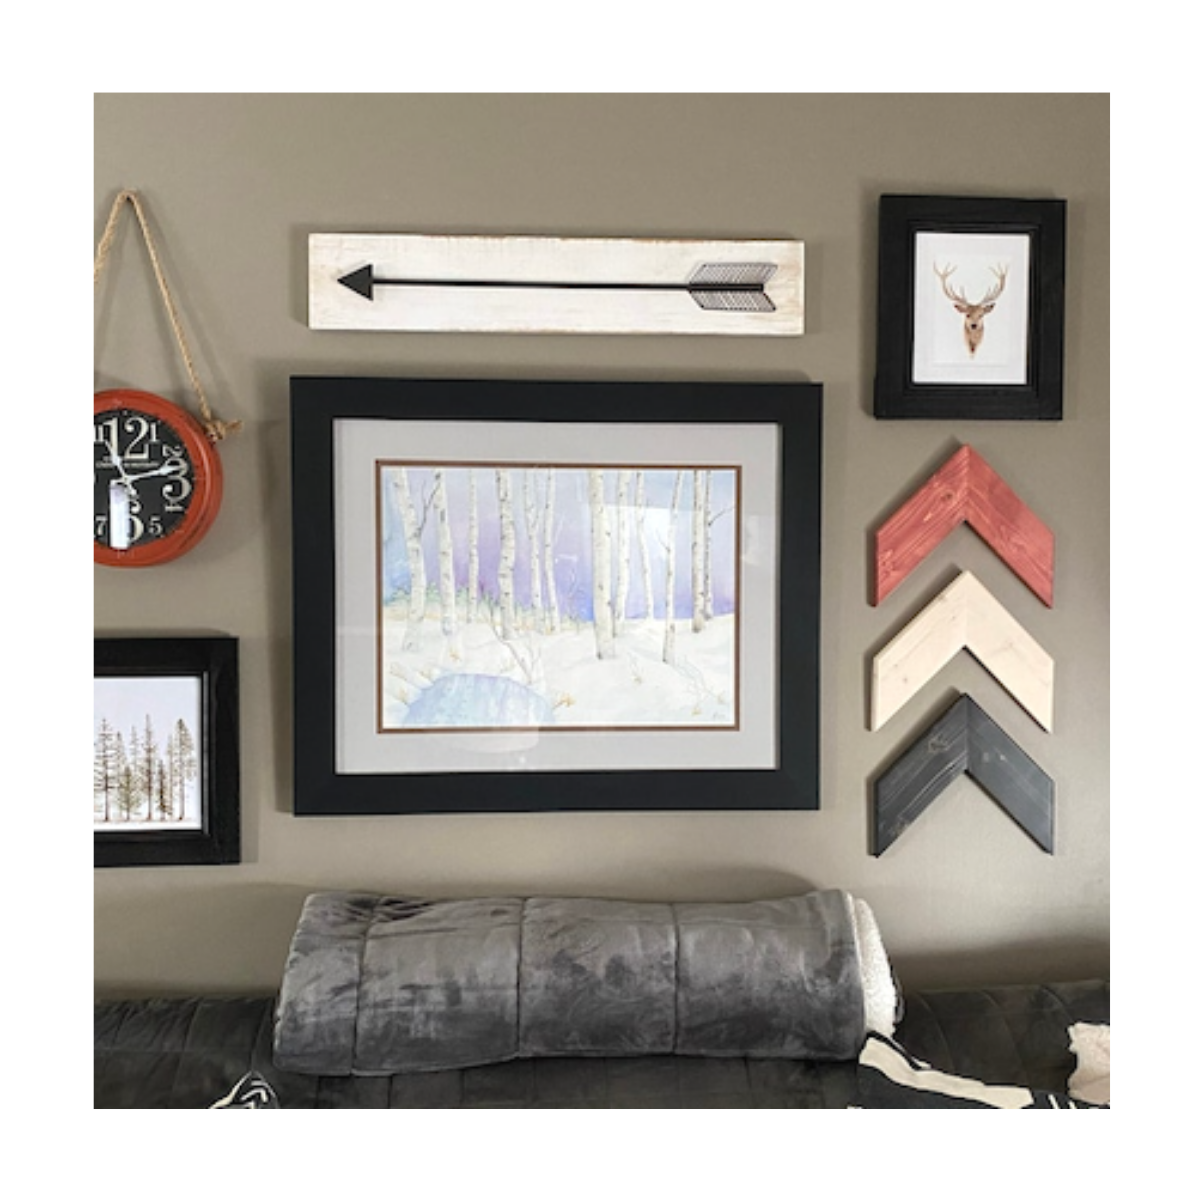 Looking over a couch nested against a wall, several pieces of wall art reside. A black face clock rimed in a red shell. Black wooden arrow on a white background. Three chevron arrows pointing upwards in red, white, and black. Also three framed pictures.